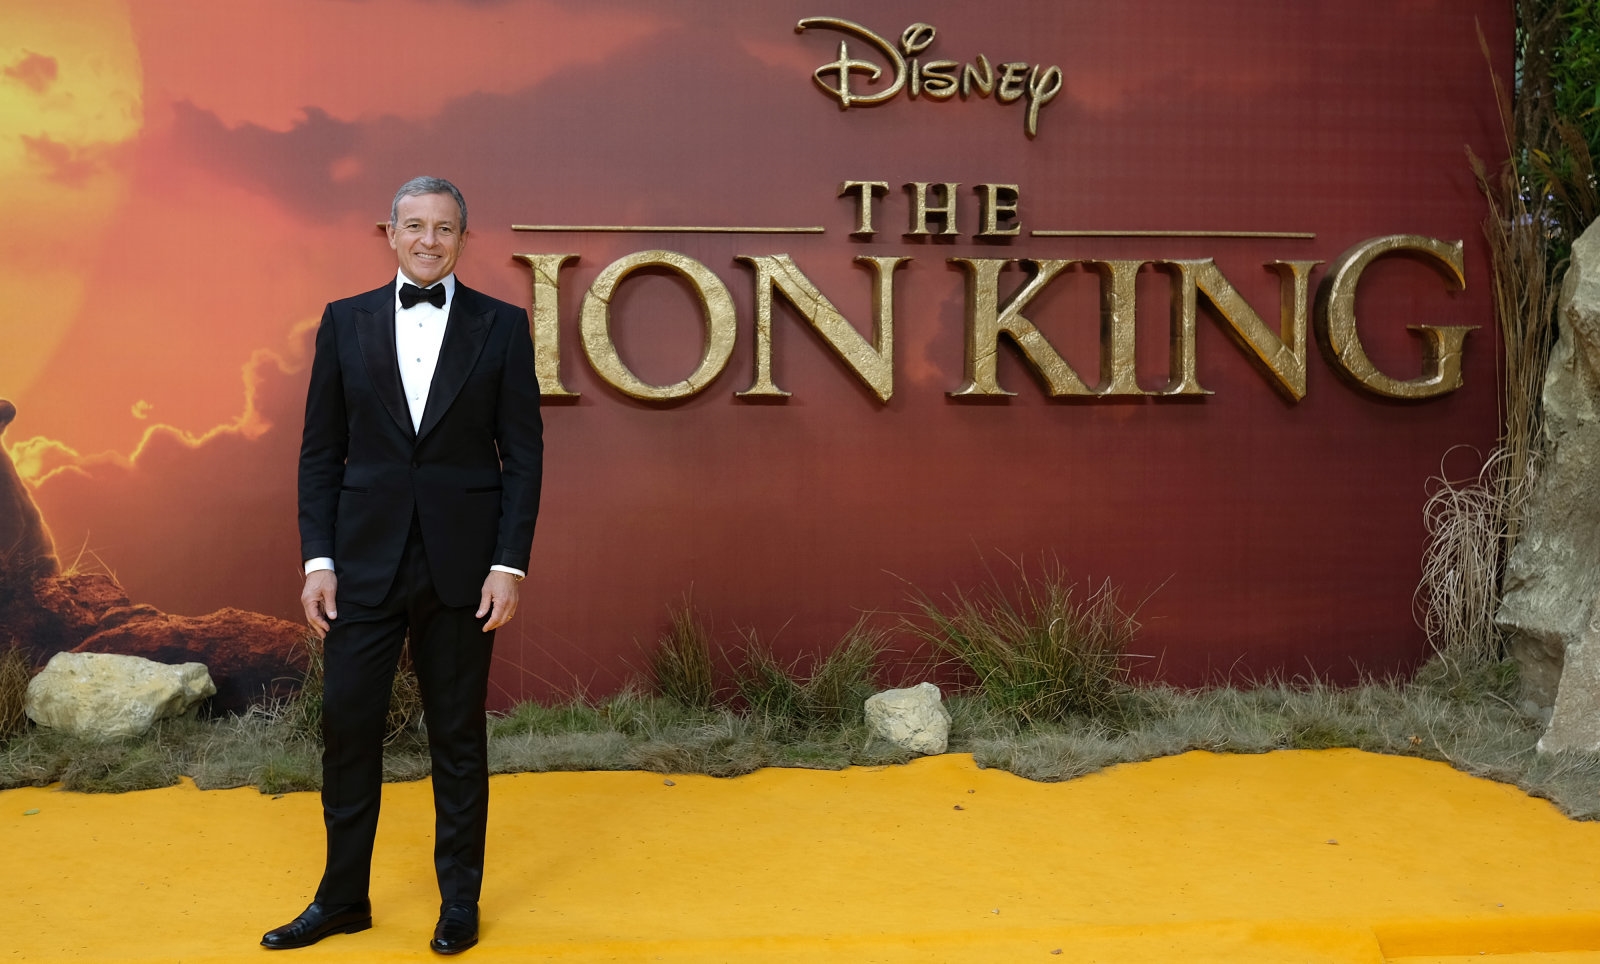 Disney CEO Bob Iger resigns from Apple board ahead of TV+ launch | DeviceDaily.com